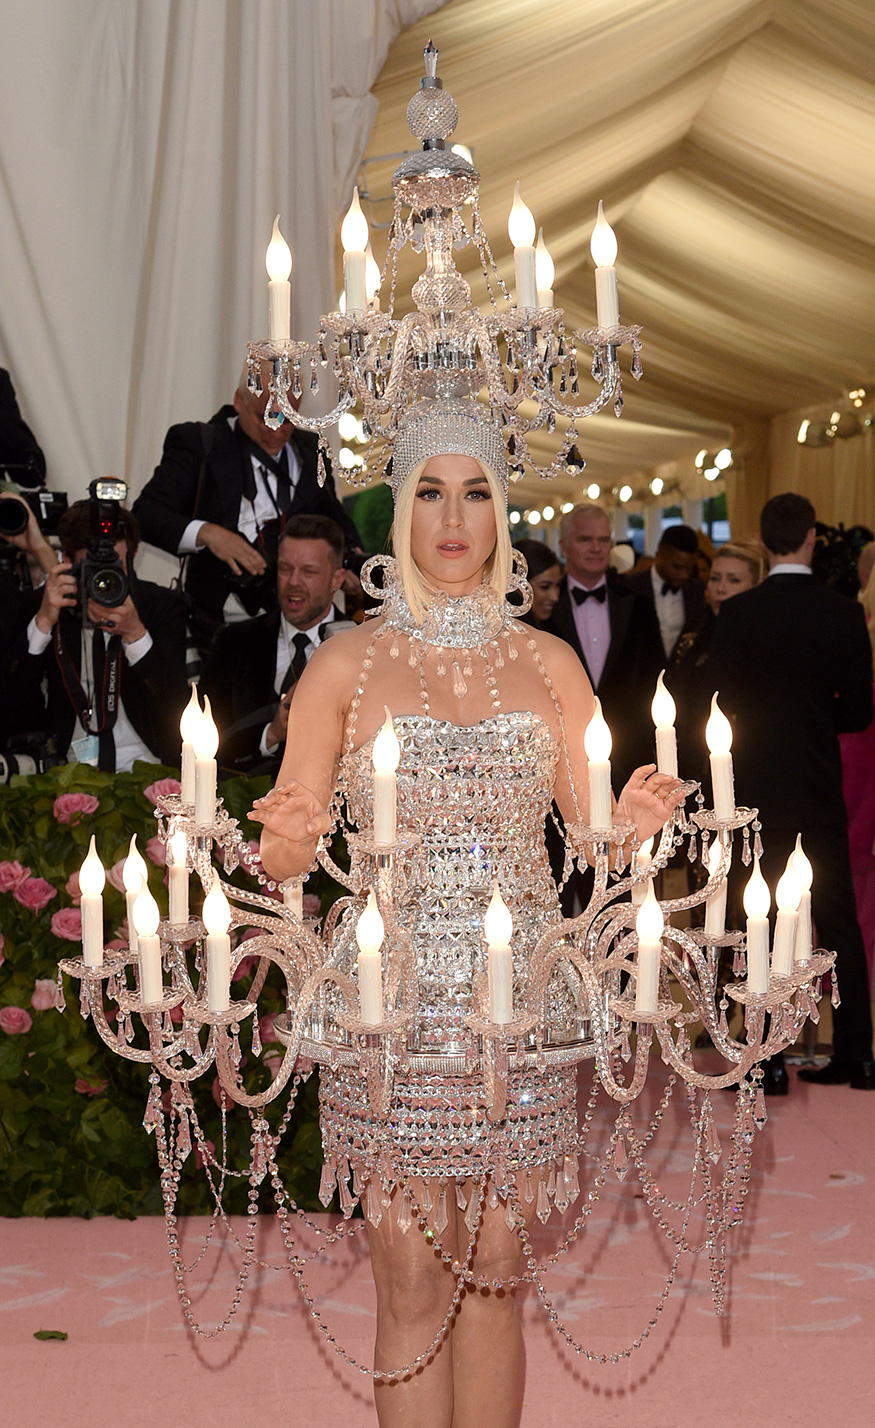 Katy Perry Lights Up 2019 Met Gala Dressed as a Chandelier; See Pics